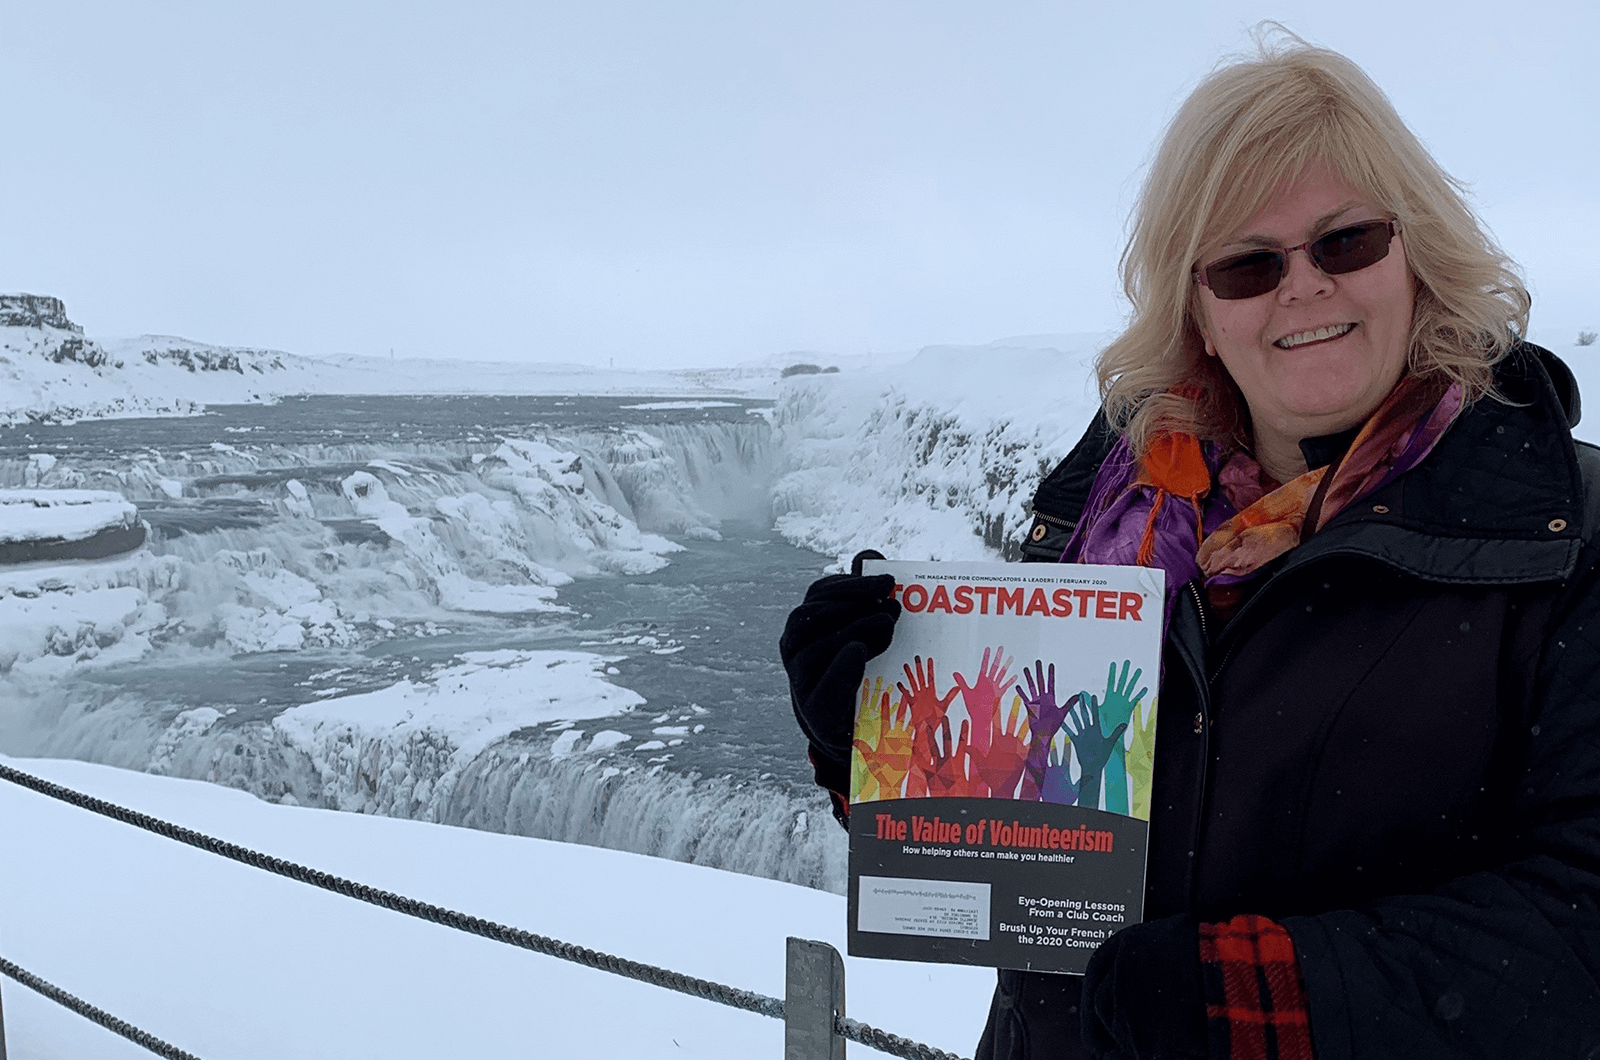 Jeanette McVeigh of Levittown, Pennsylvania, U.S., takes in the views of the Gullfoss Falls in southwest Iceland—one of Iceland’s most iconic and popular sites.